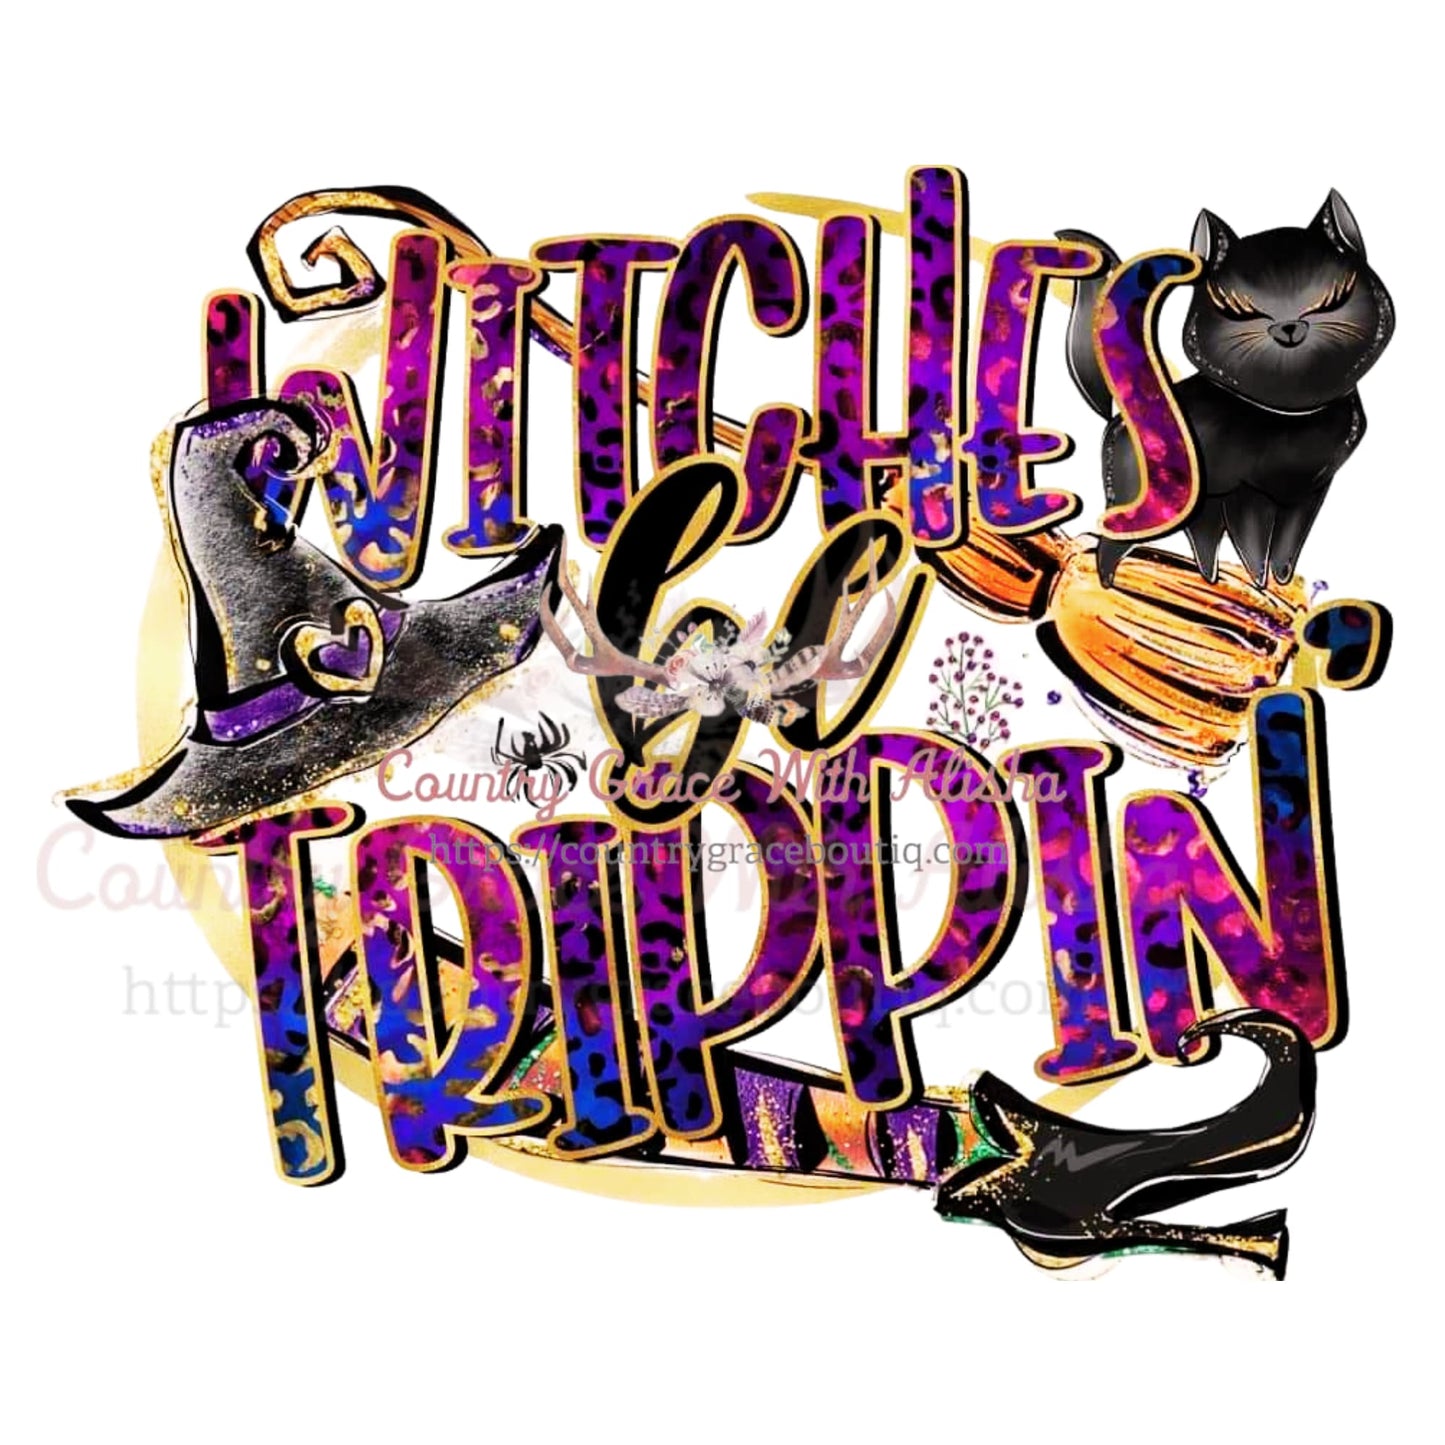 Witches Be Trippin Sublimation Transfer - Sub $1.50 Country 